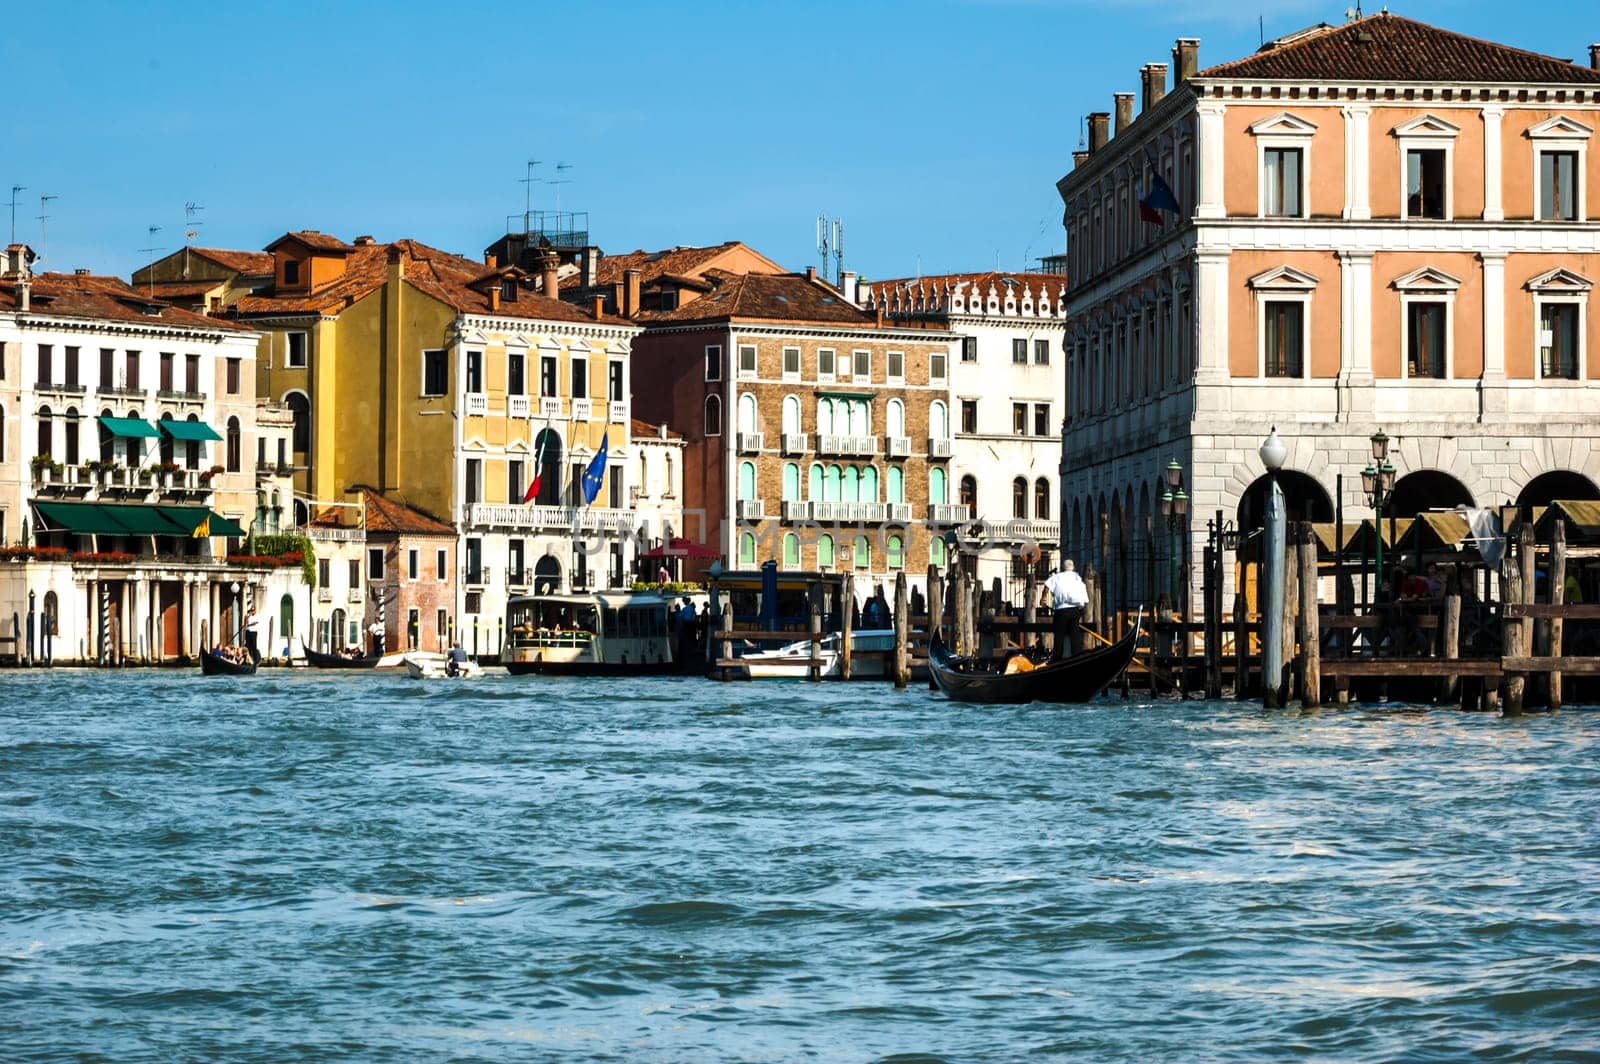 View of Grand Canal with Venetian gondola